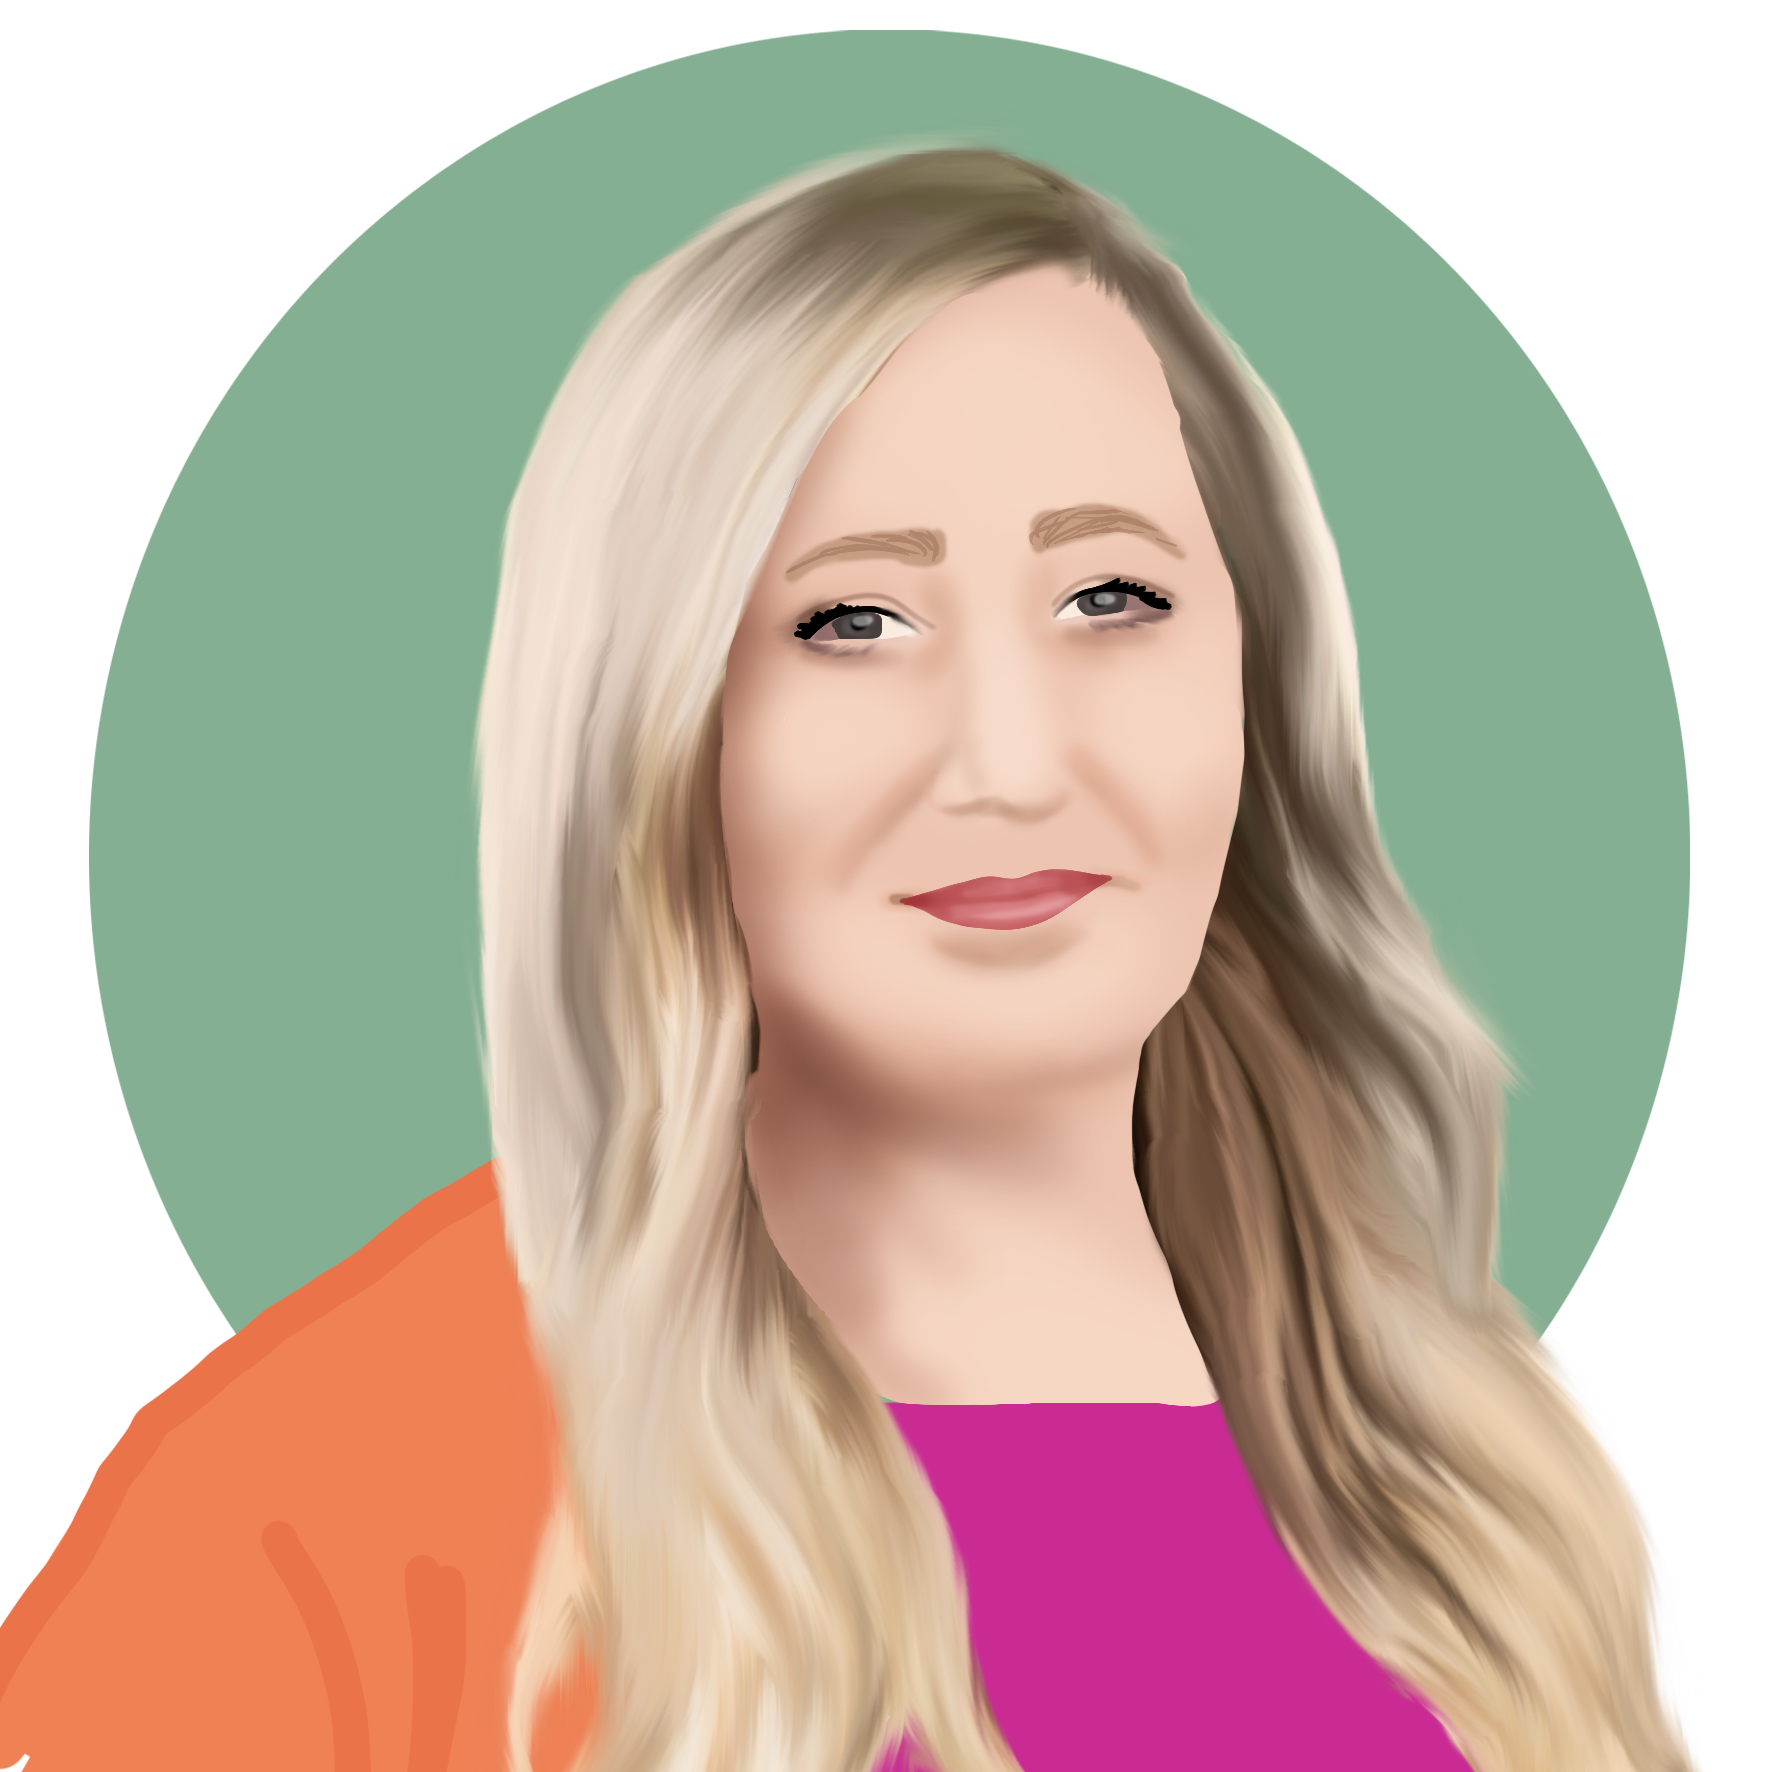 Profile illustration of Kelly Fraser with blonde long hair, orange and hot pink top on a green circled background